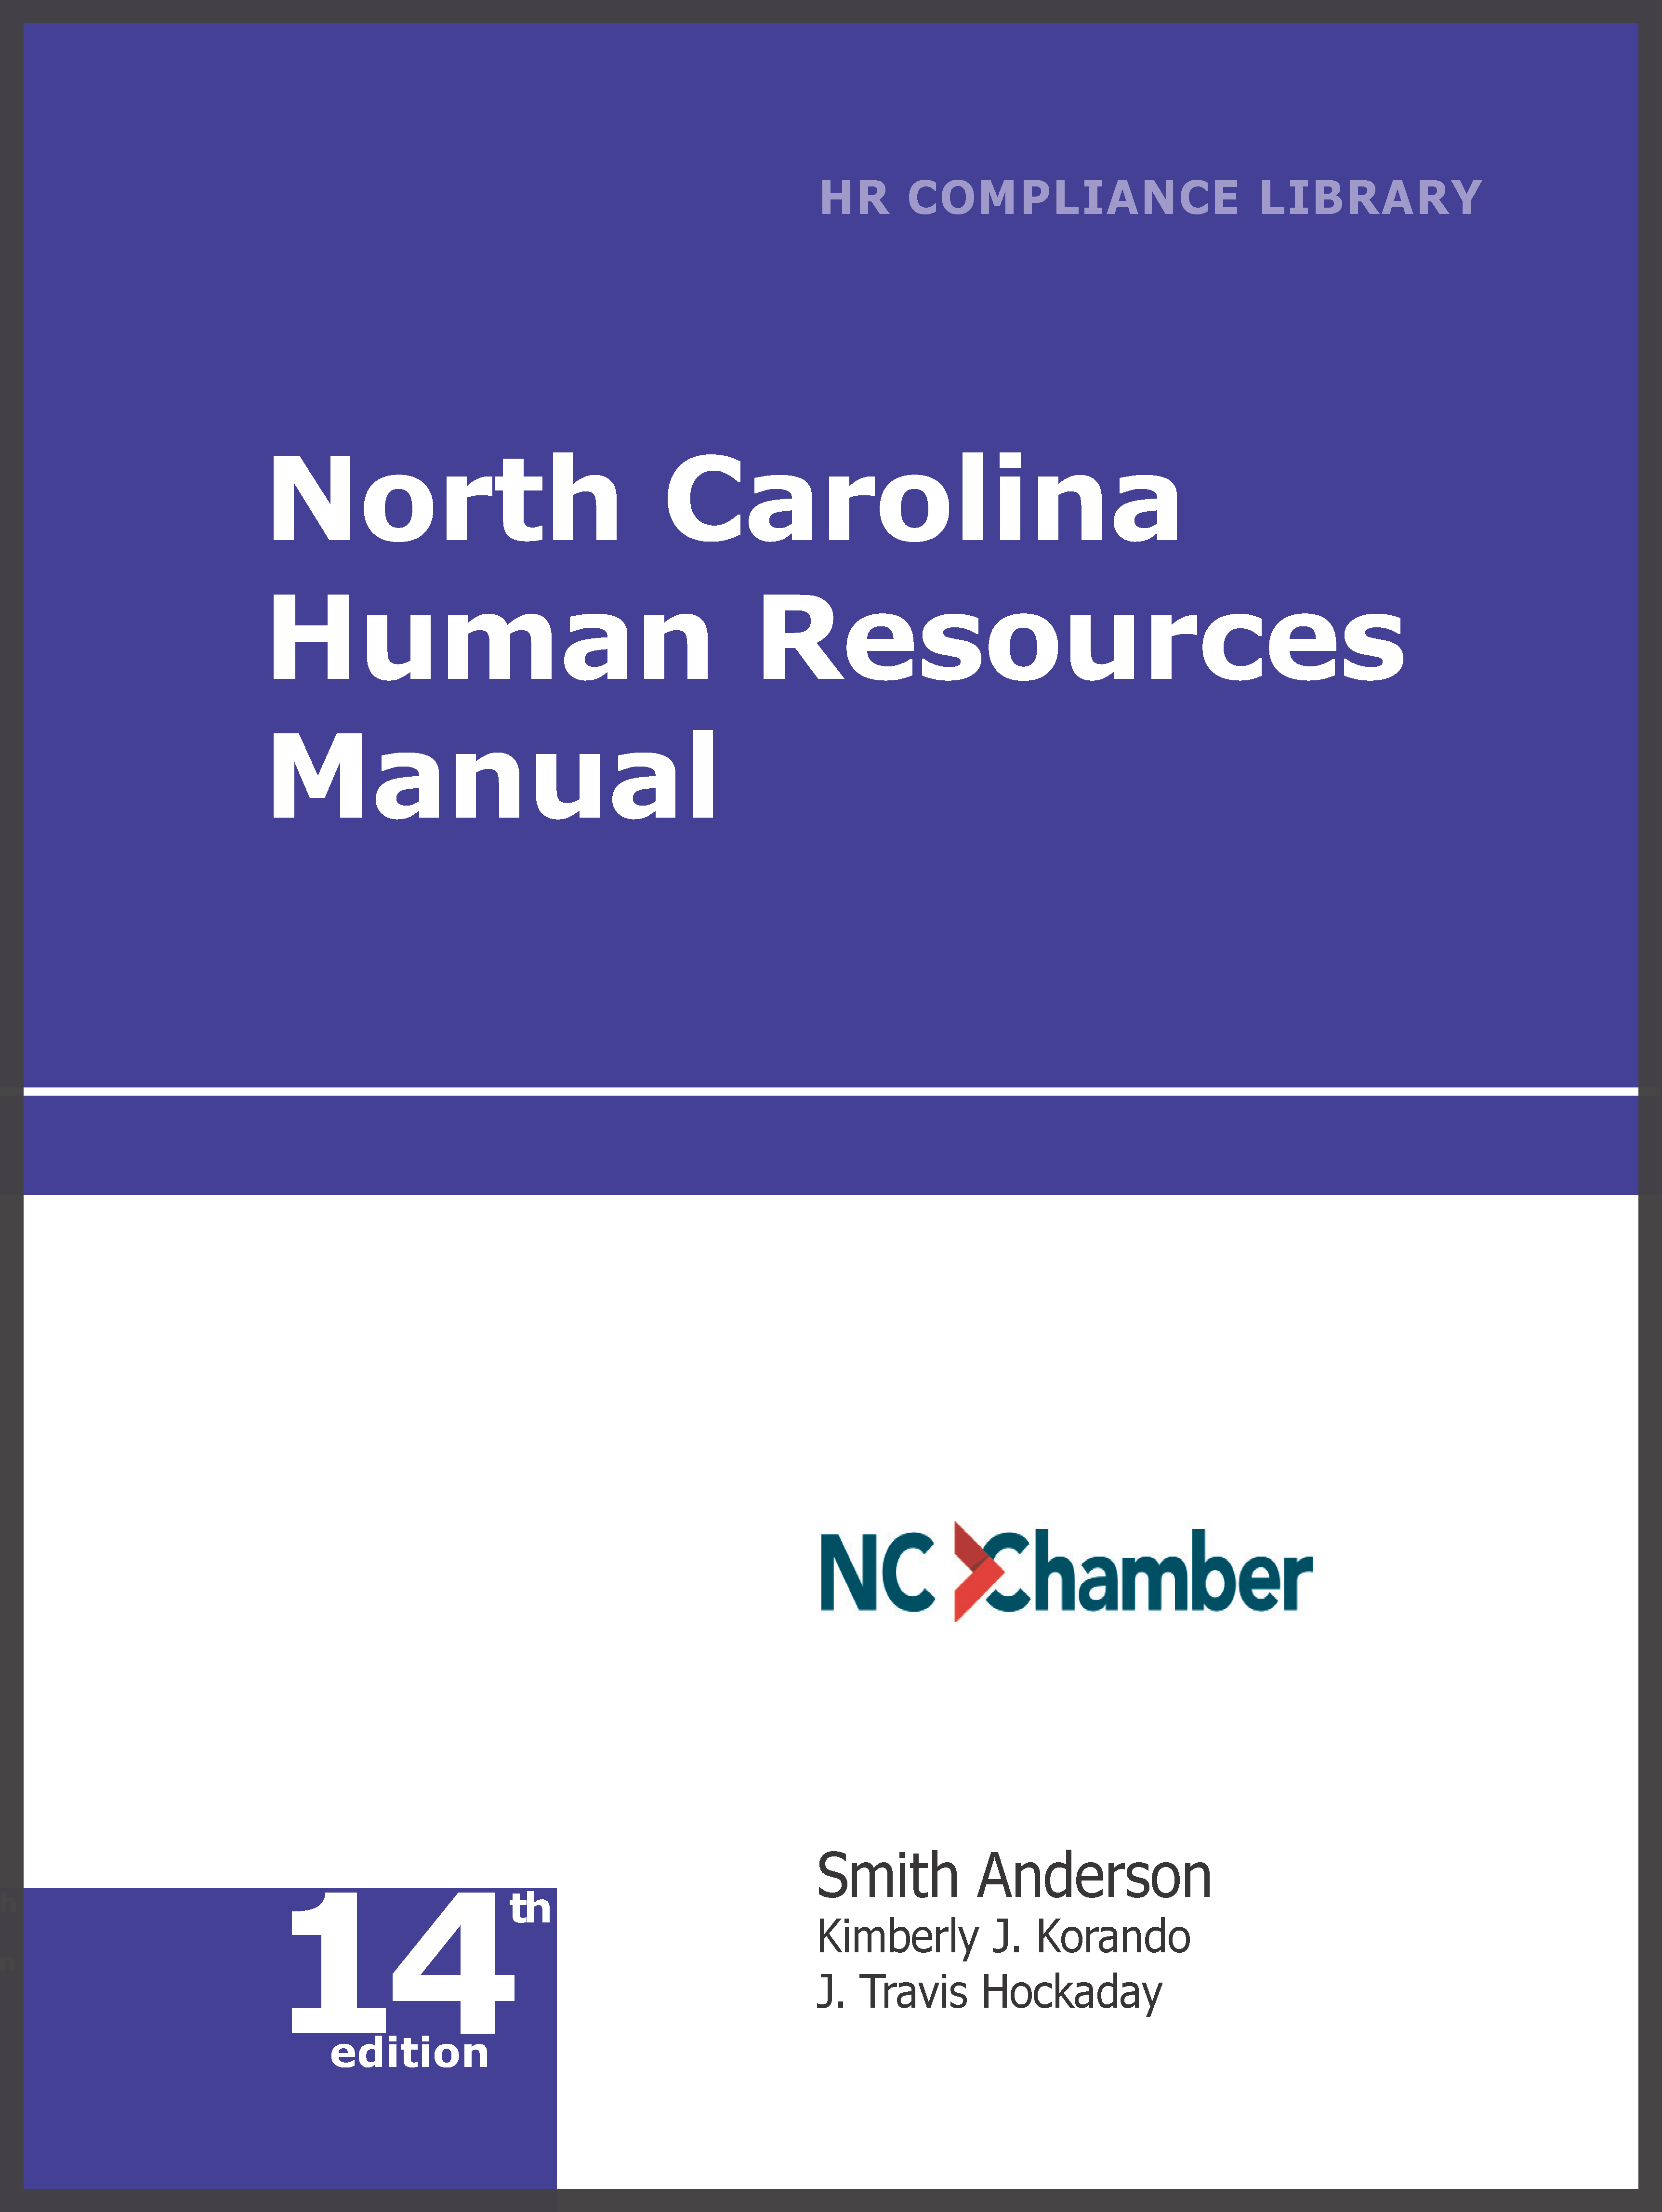 North Carolina Human Resources Library employment law image, remote work, labor laws, employment laws, right to work, order of protection, minimum wage